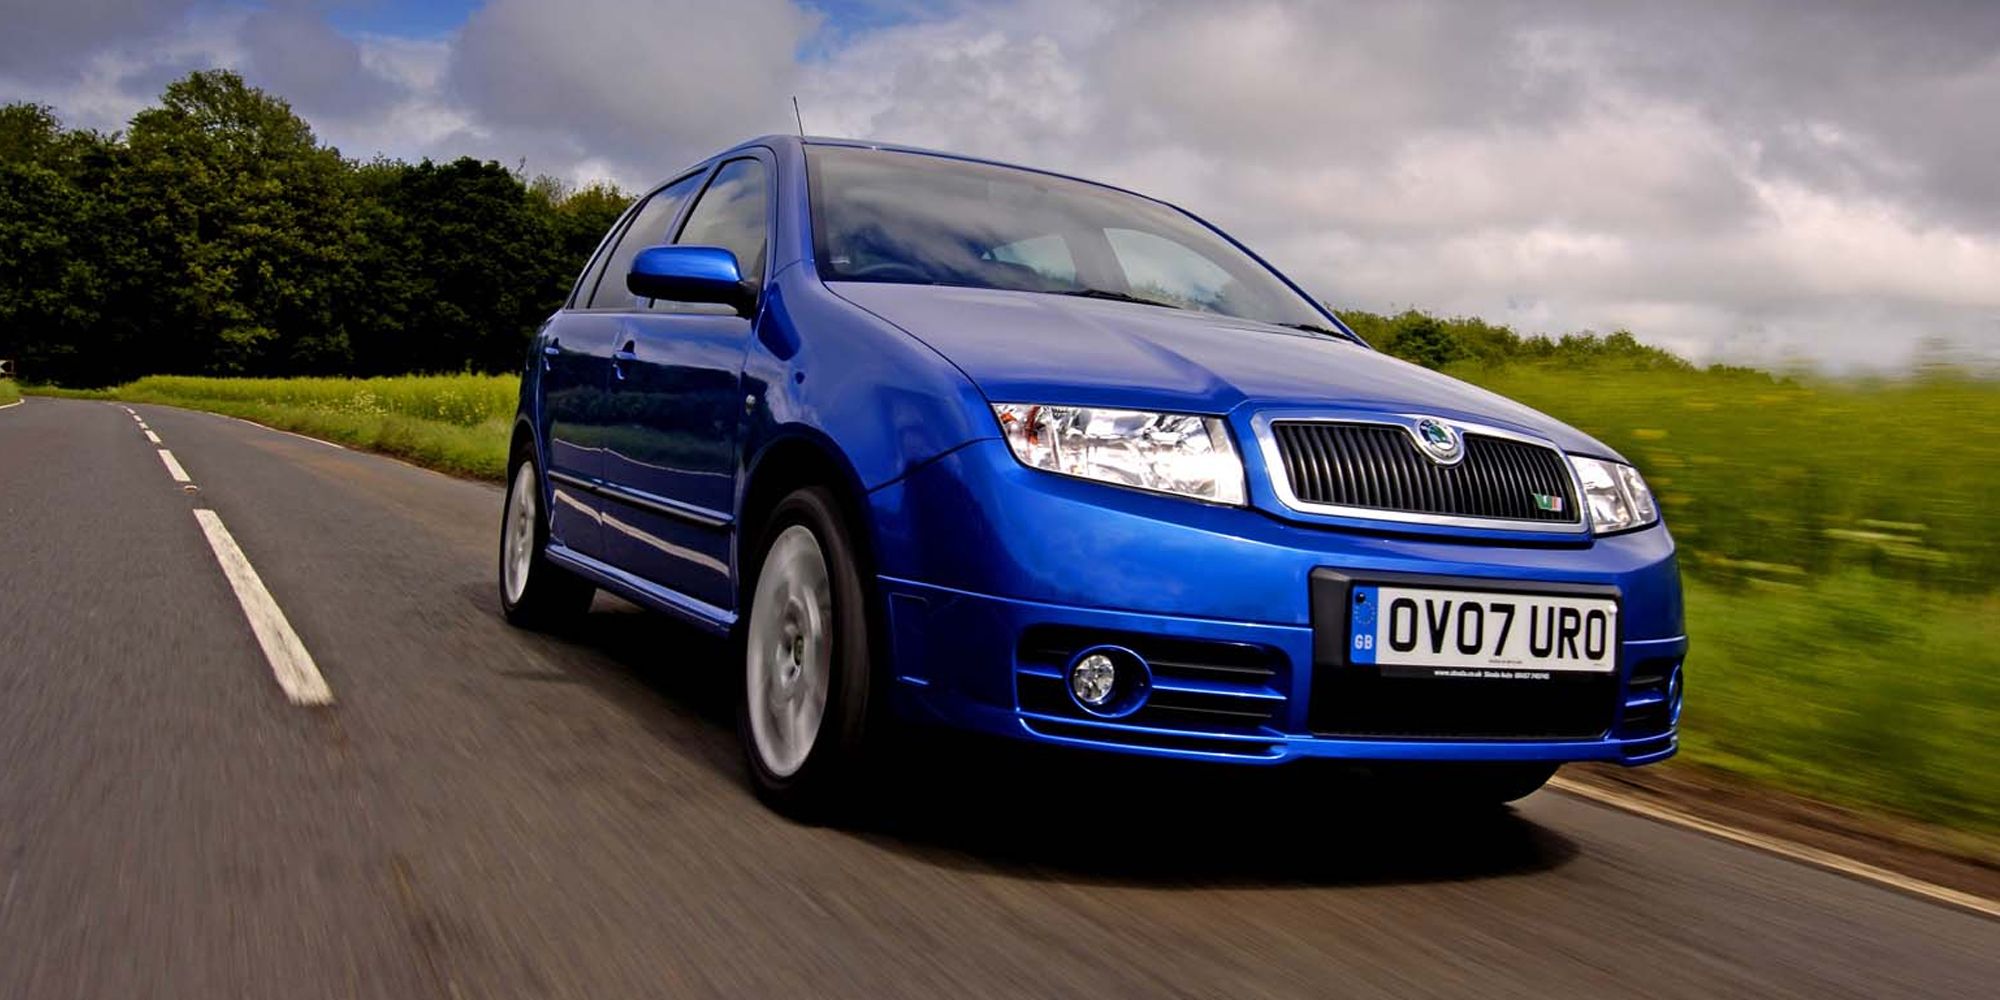 The Fabia RS on the move